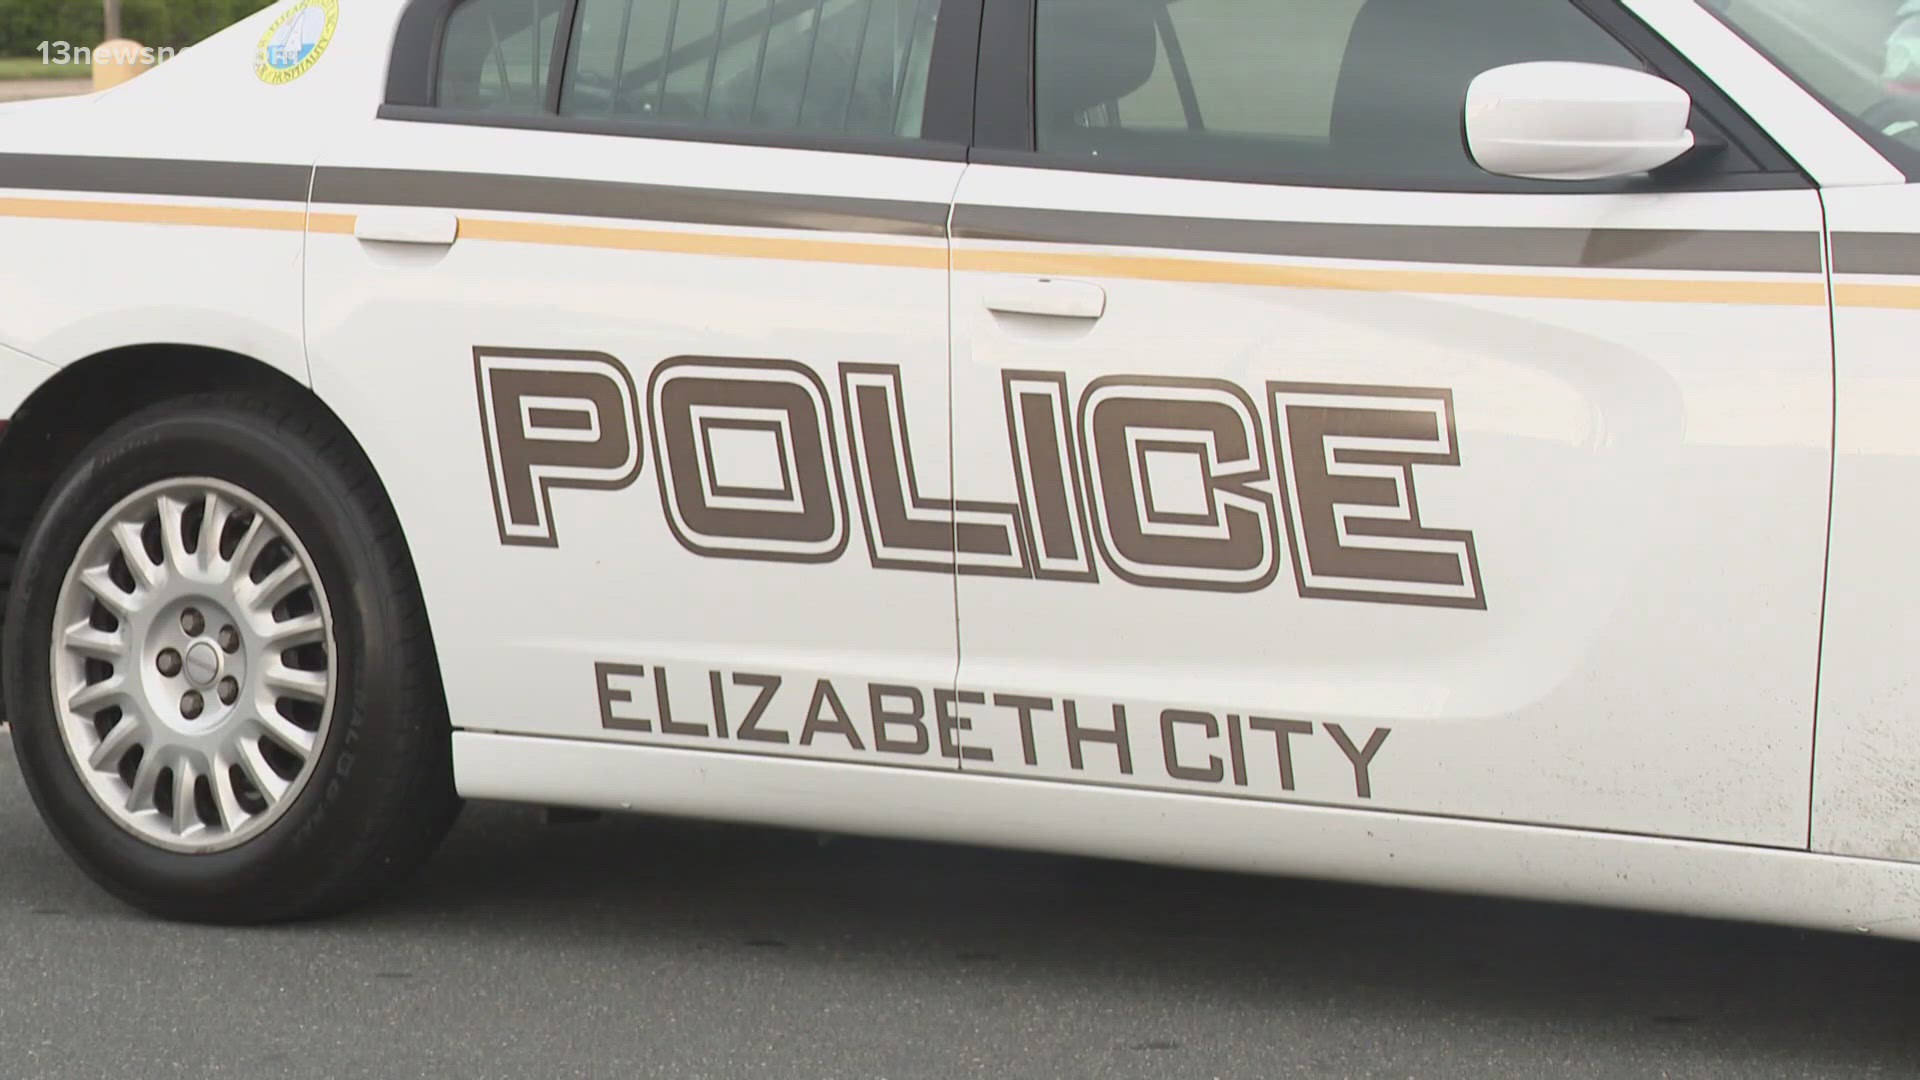 The Elizabeth City officer has been deemed justified in their use of deadly force against a murder suspect in late April.